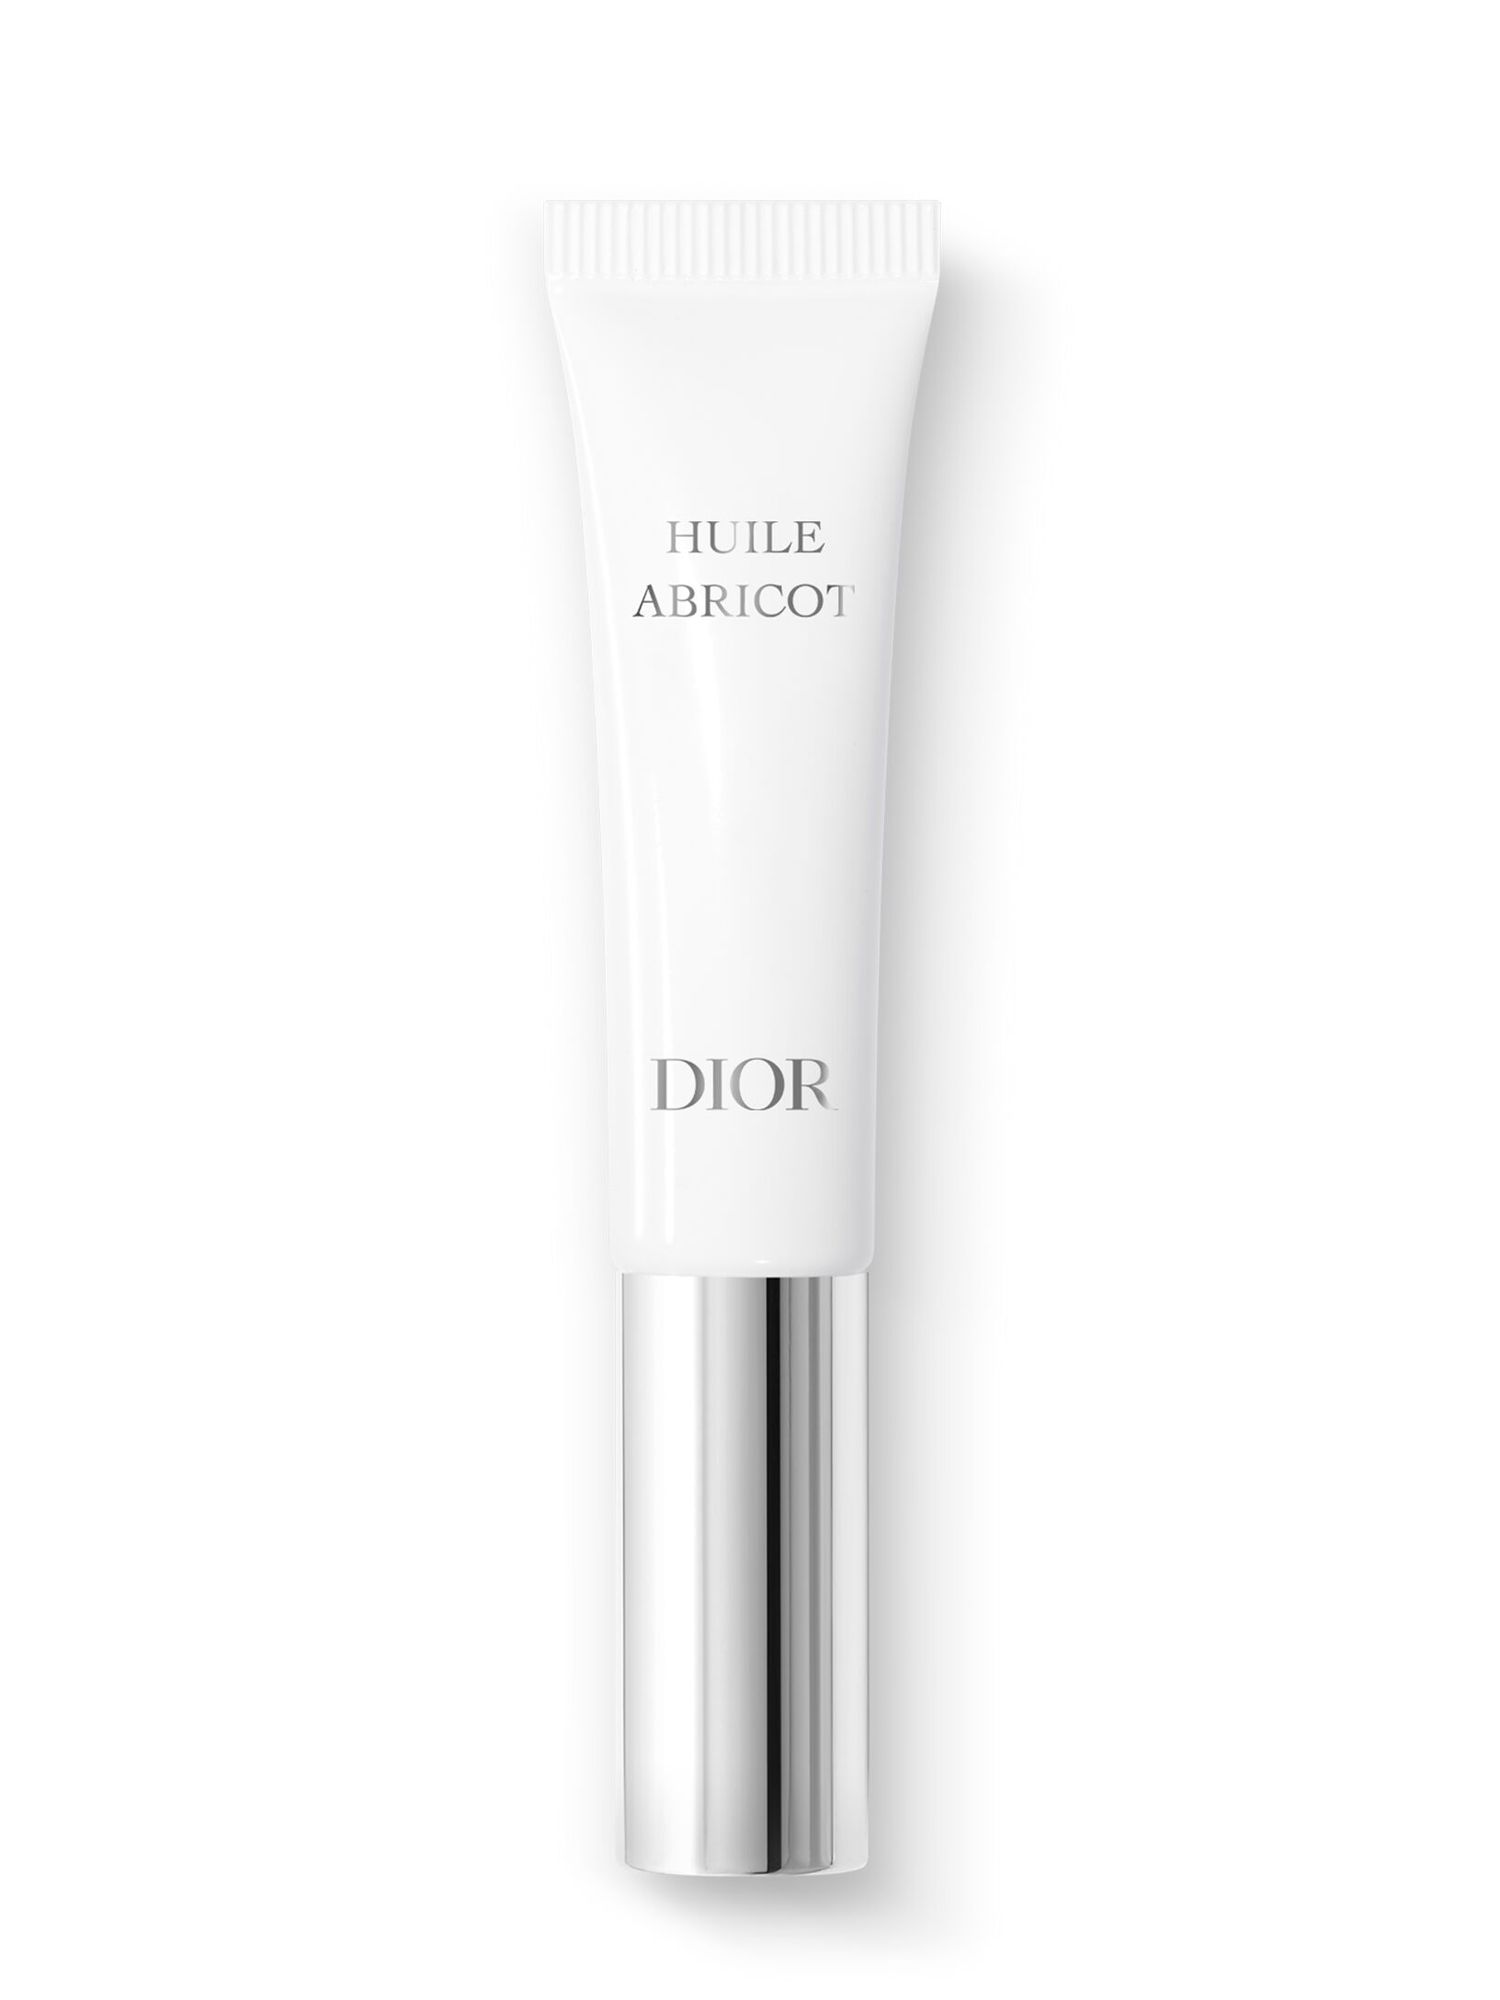 DIOR Huile Abricot Nutritive Serum For Nails And Cuticles, 7.5ml 1